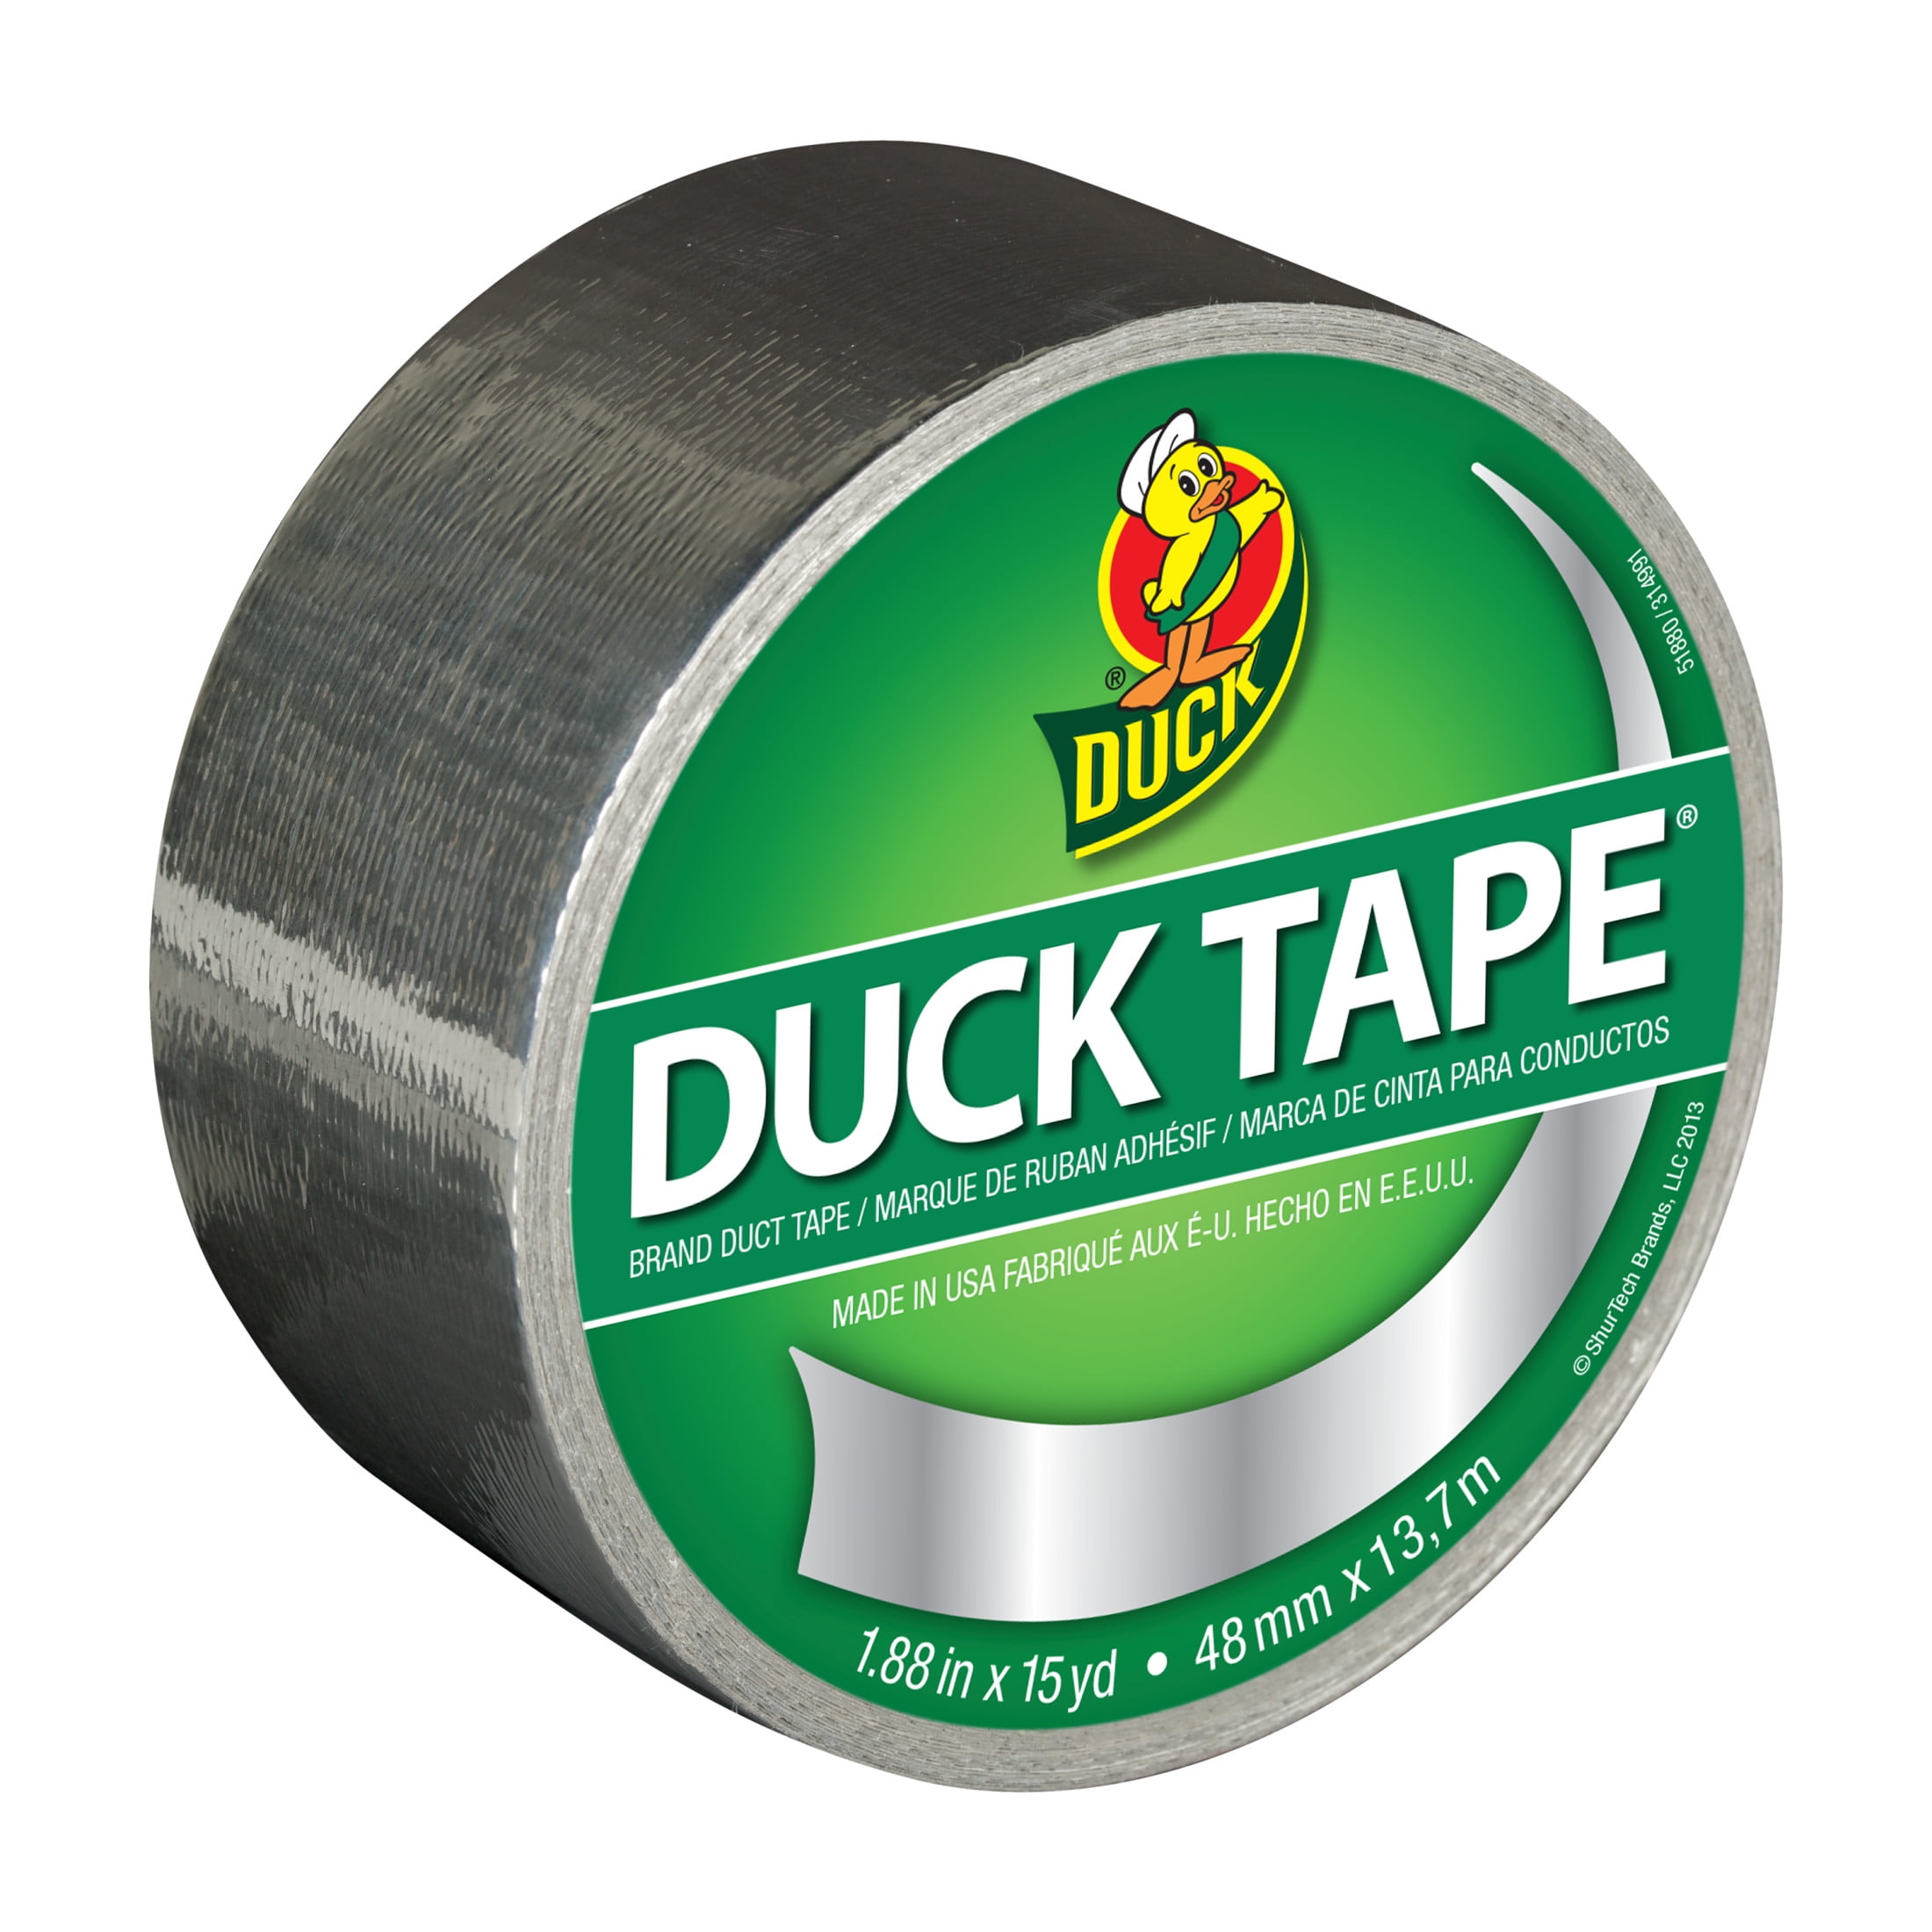 Is It Duck Tape or Duct Tape?